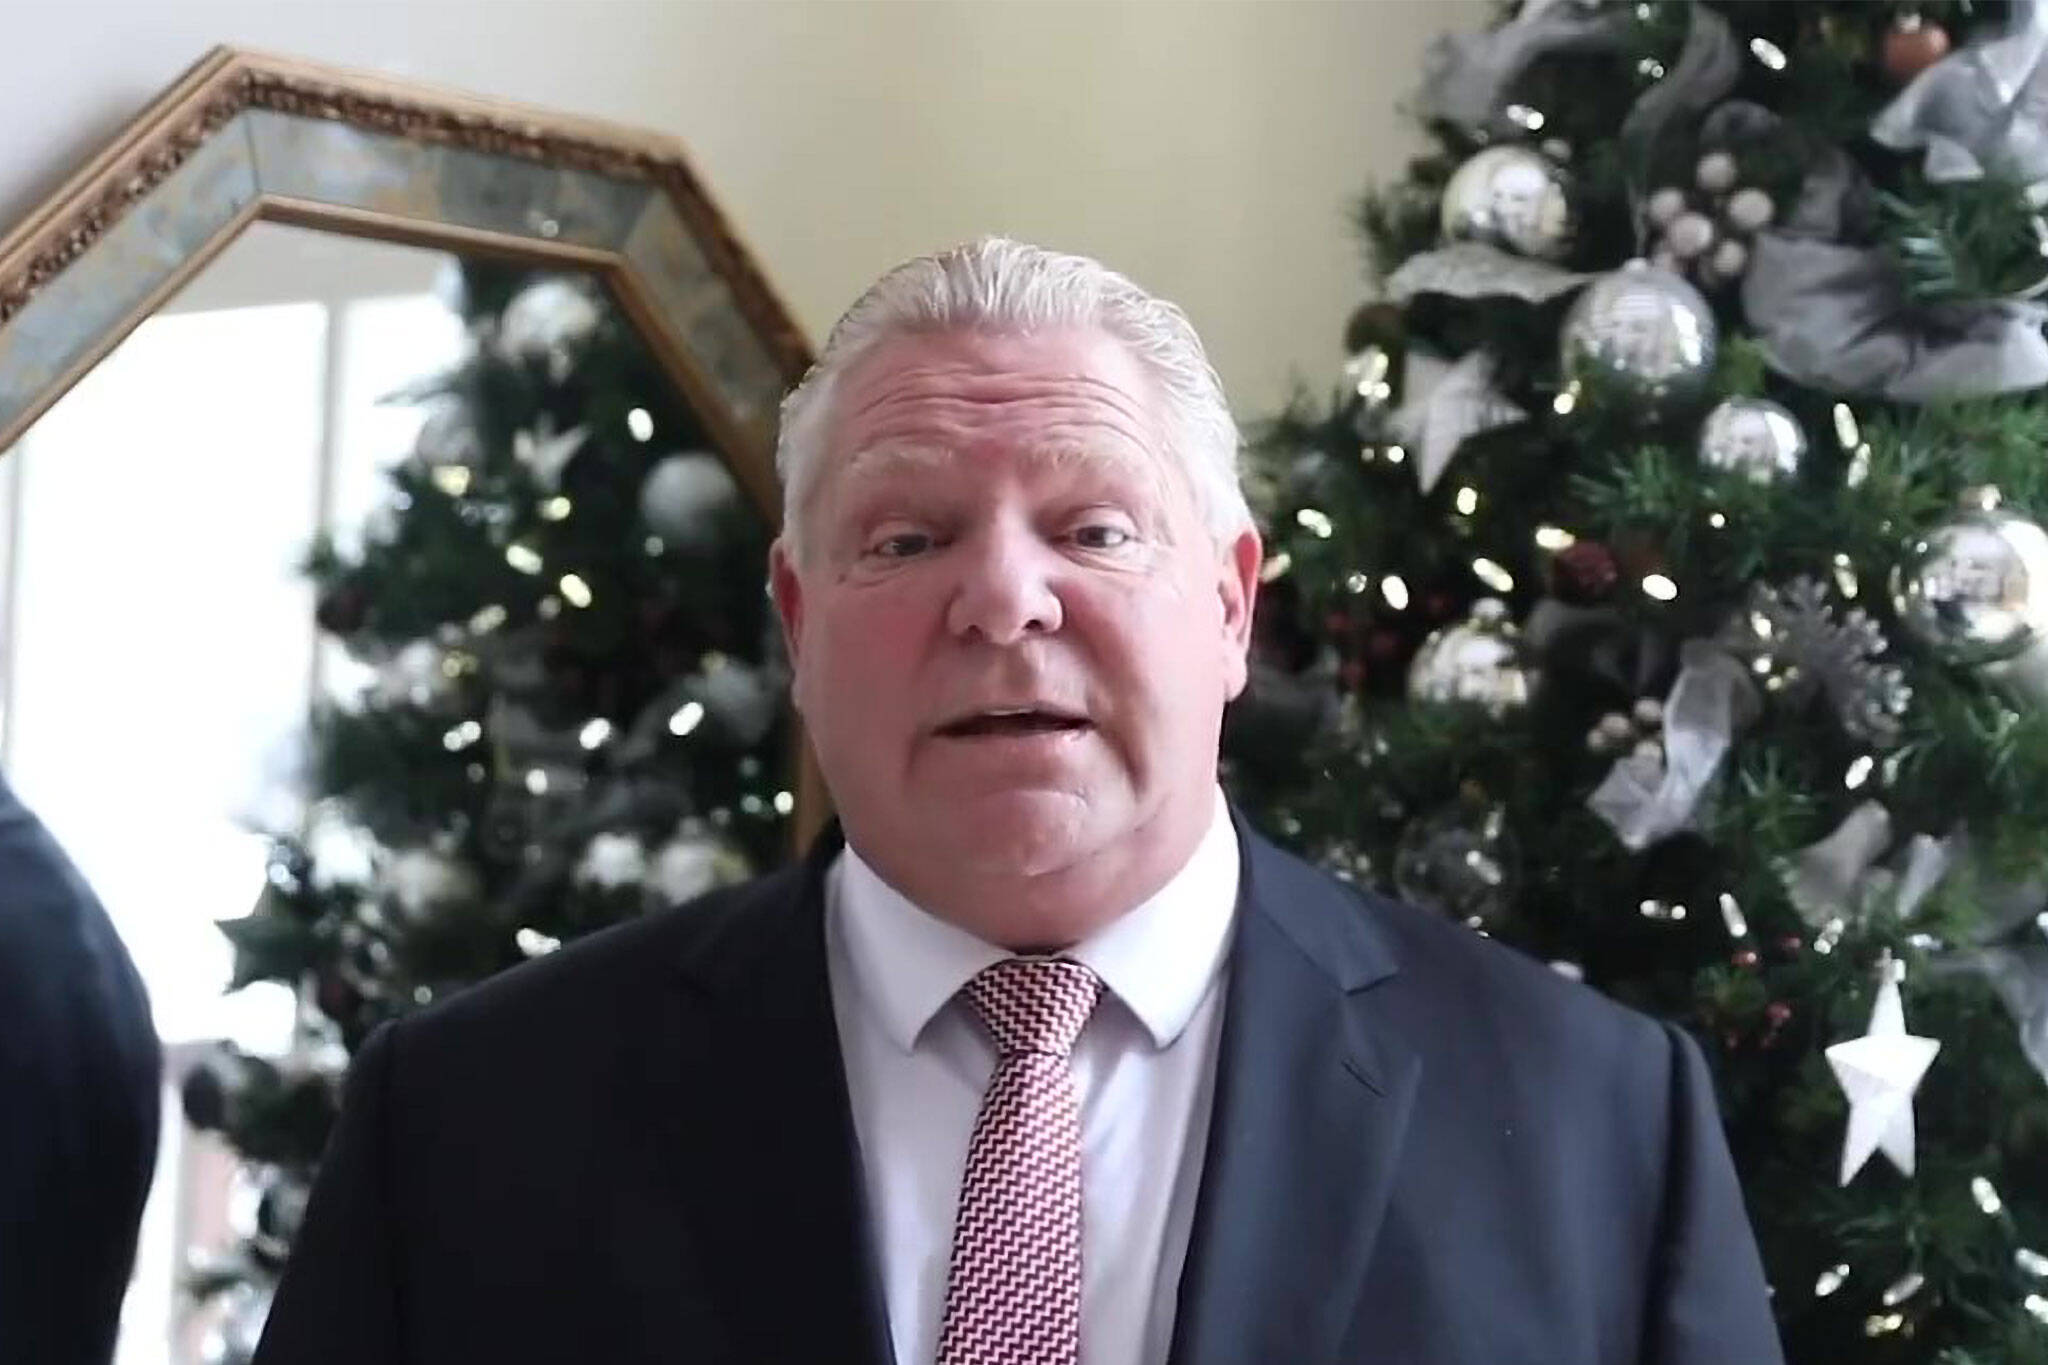 where was doug ford today